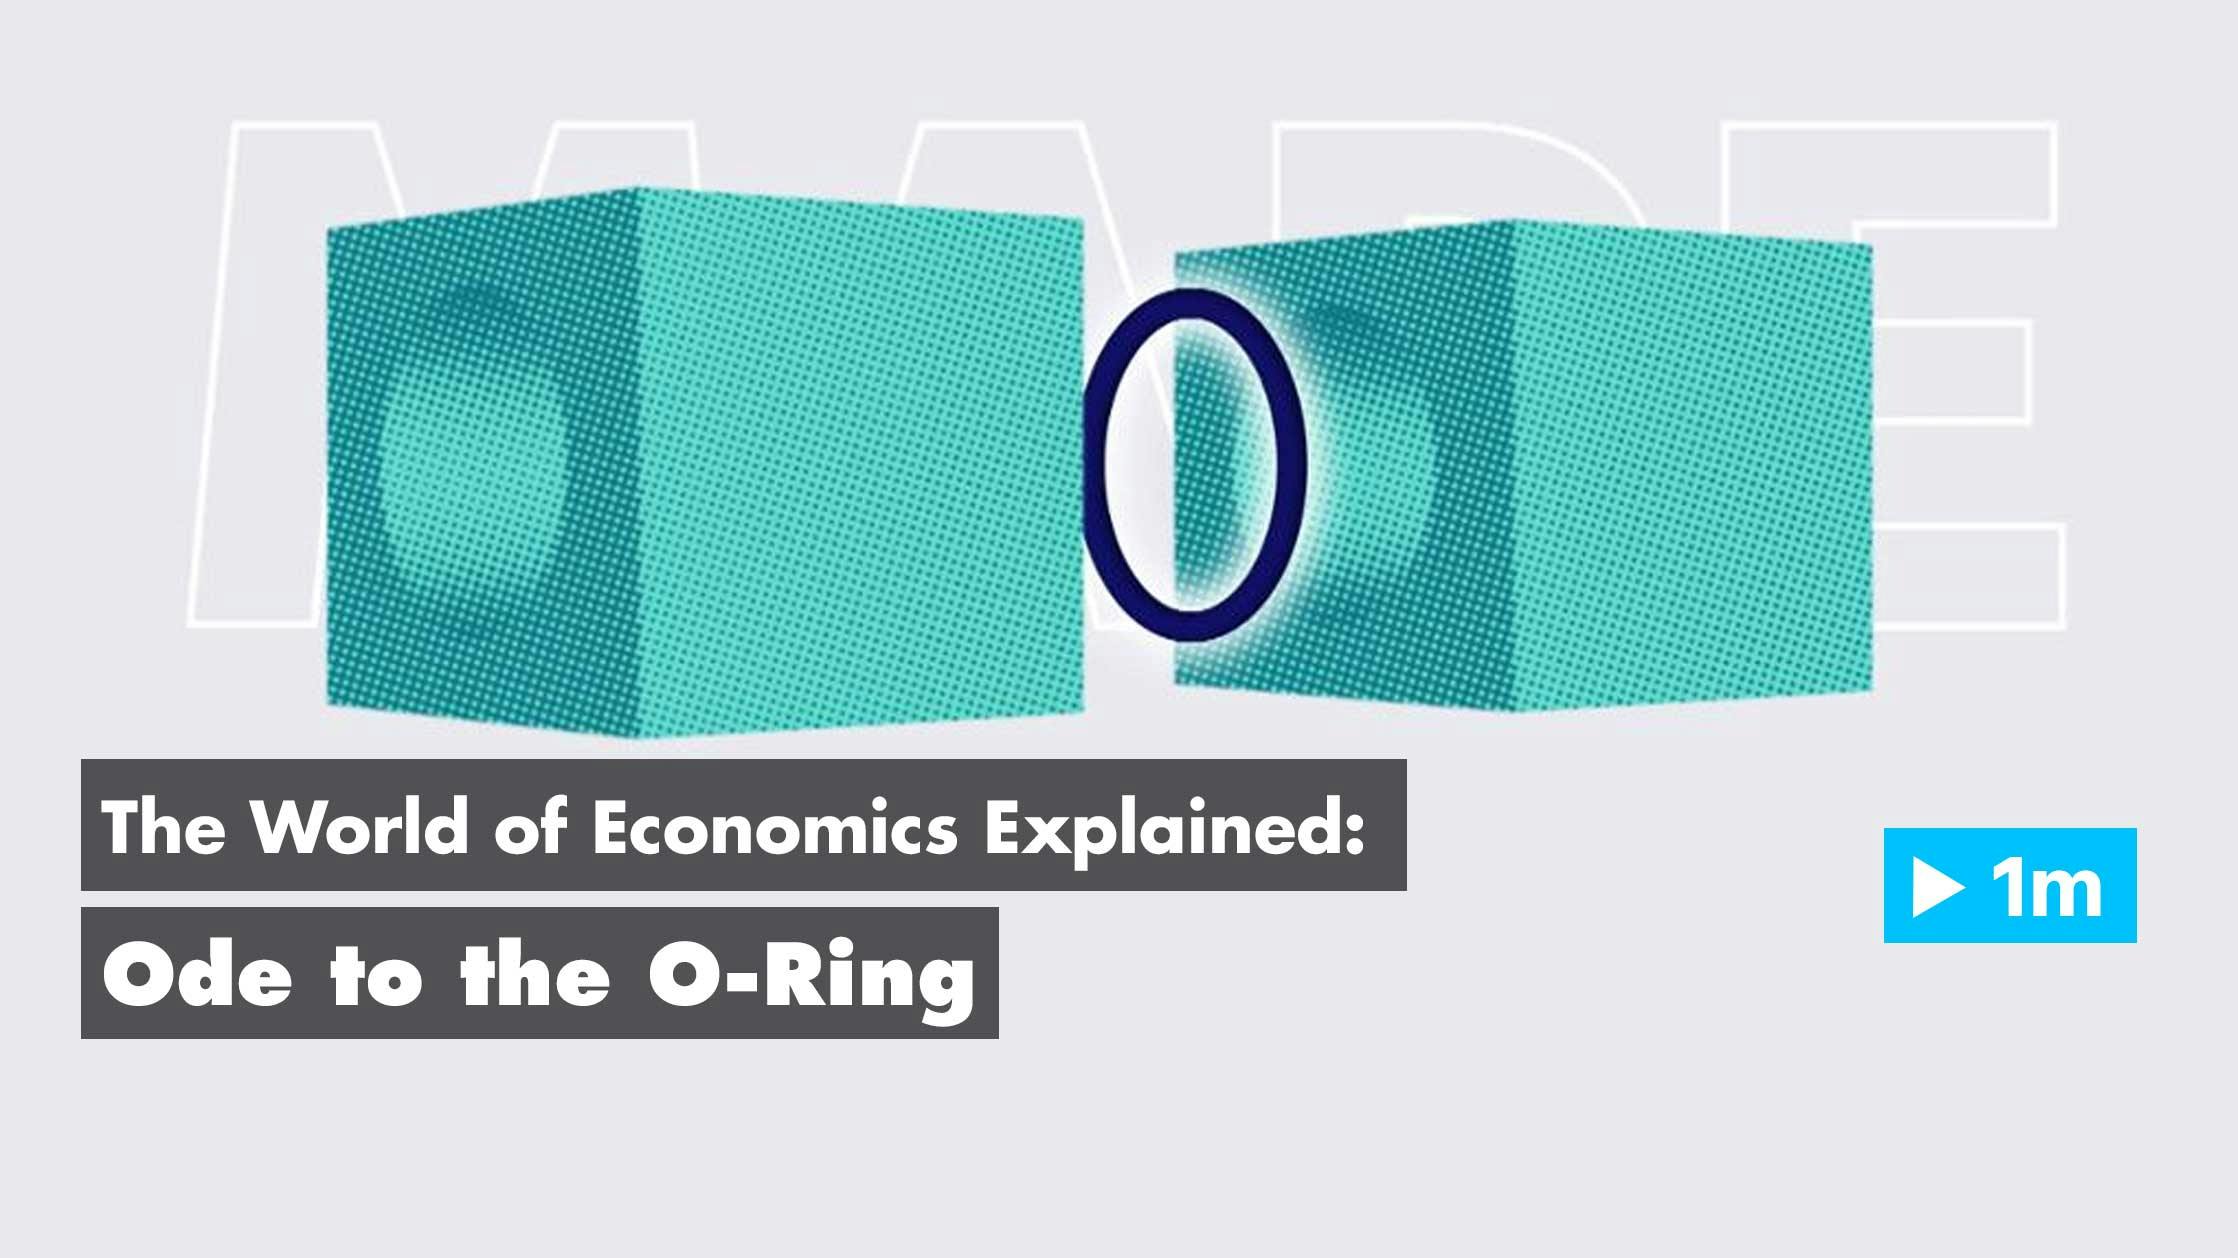 The World of Economics Explained: Ode to the O-ring